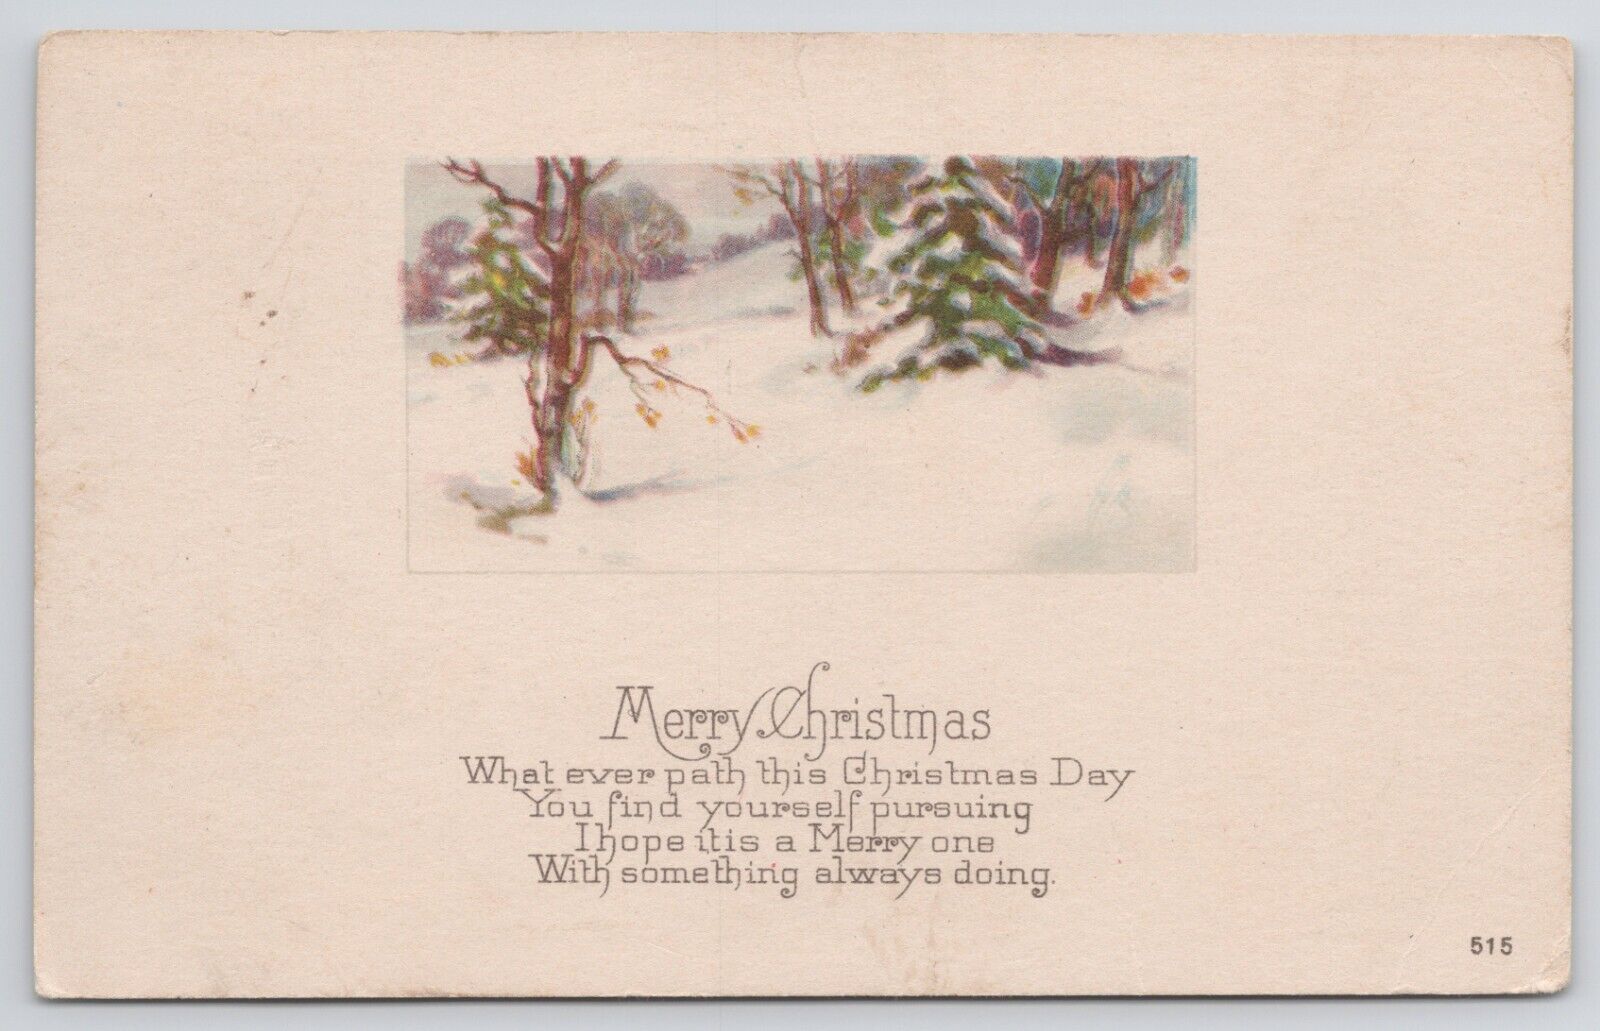 Merry Christmas Greeting Trees in Snow 1924 Divided Back Postcard